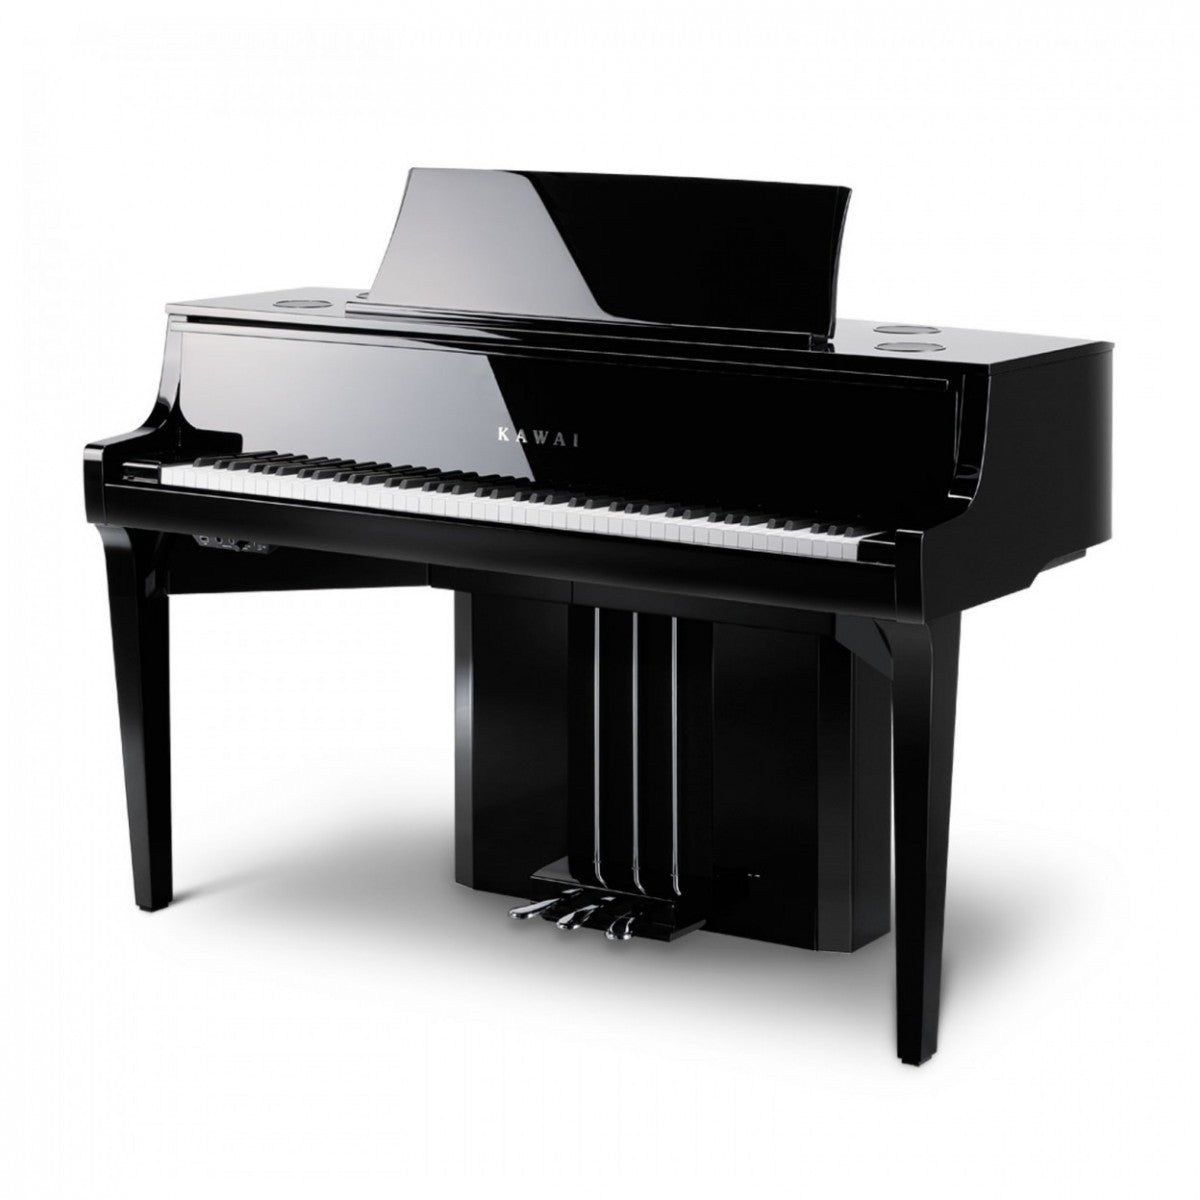 Hybrid Piano - Hybrid Piano Between Electric and Mechanical